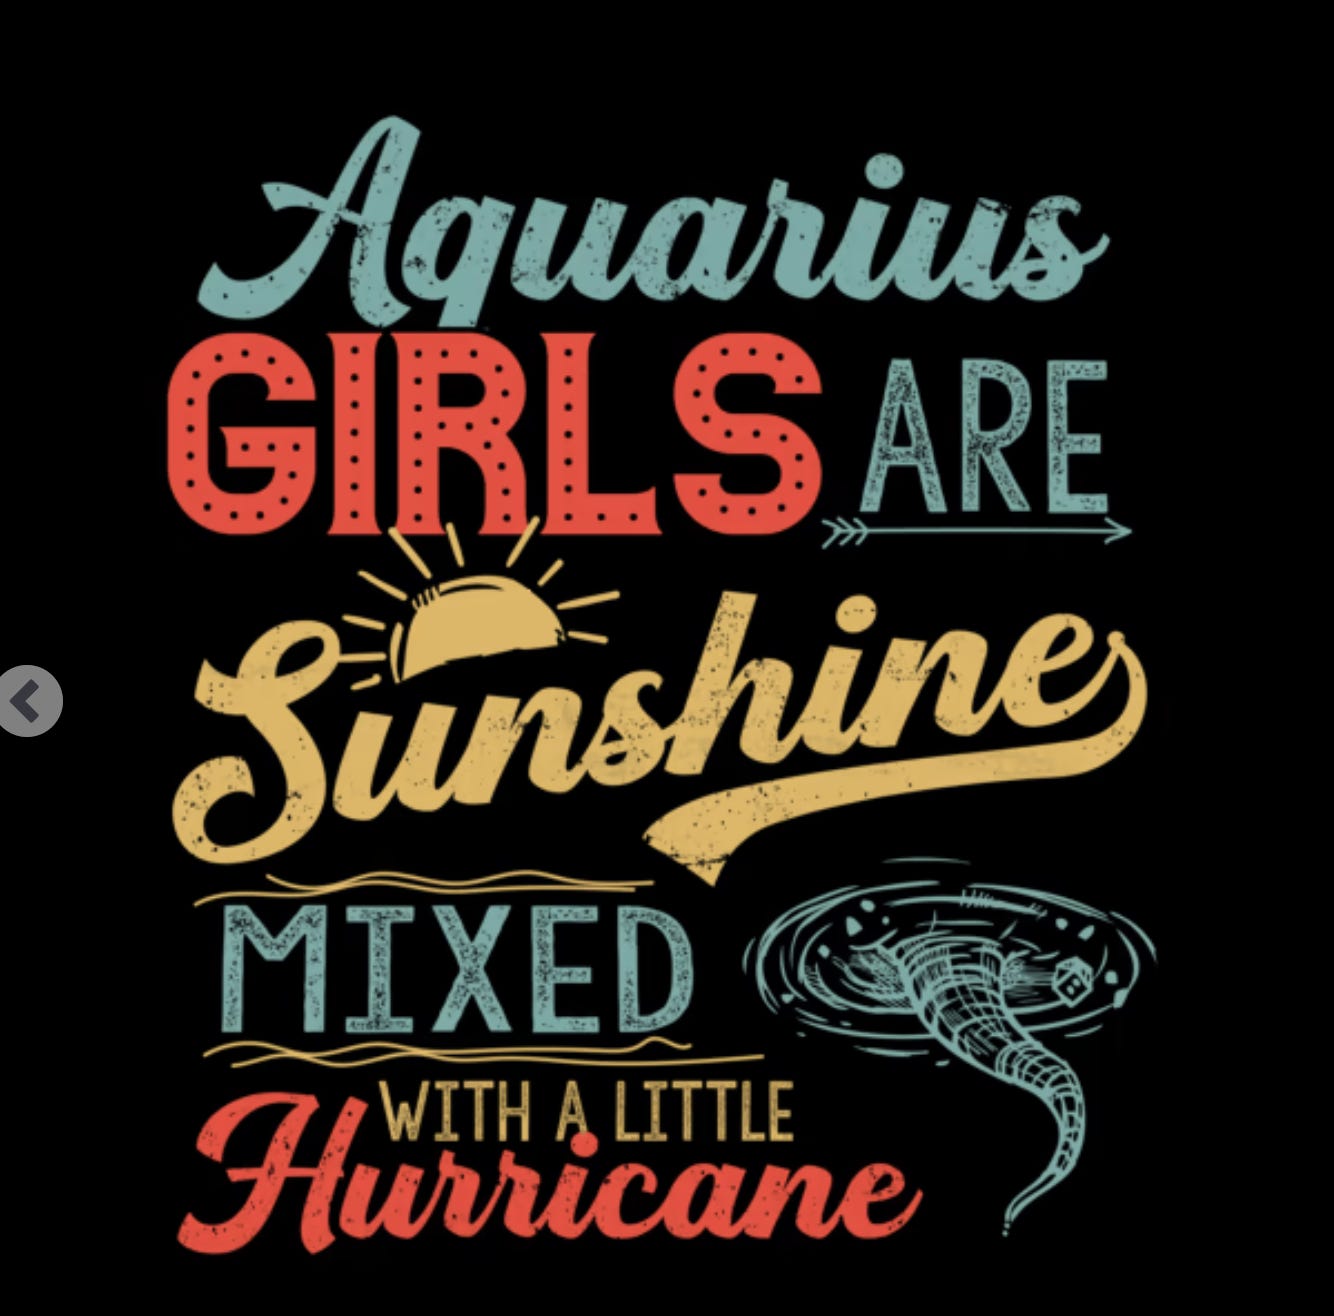 Aquarius girls are sunshine mixed with a little hurricane